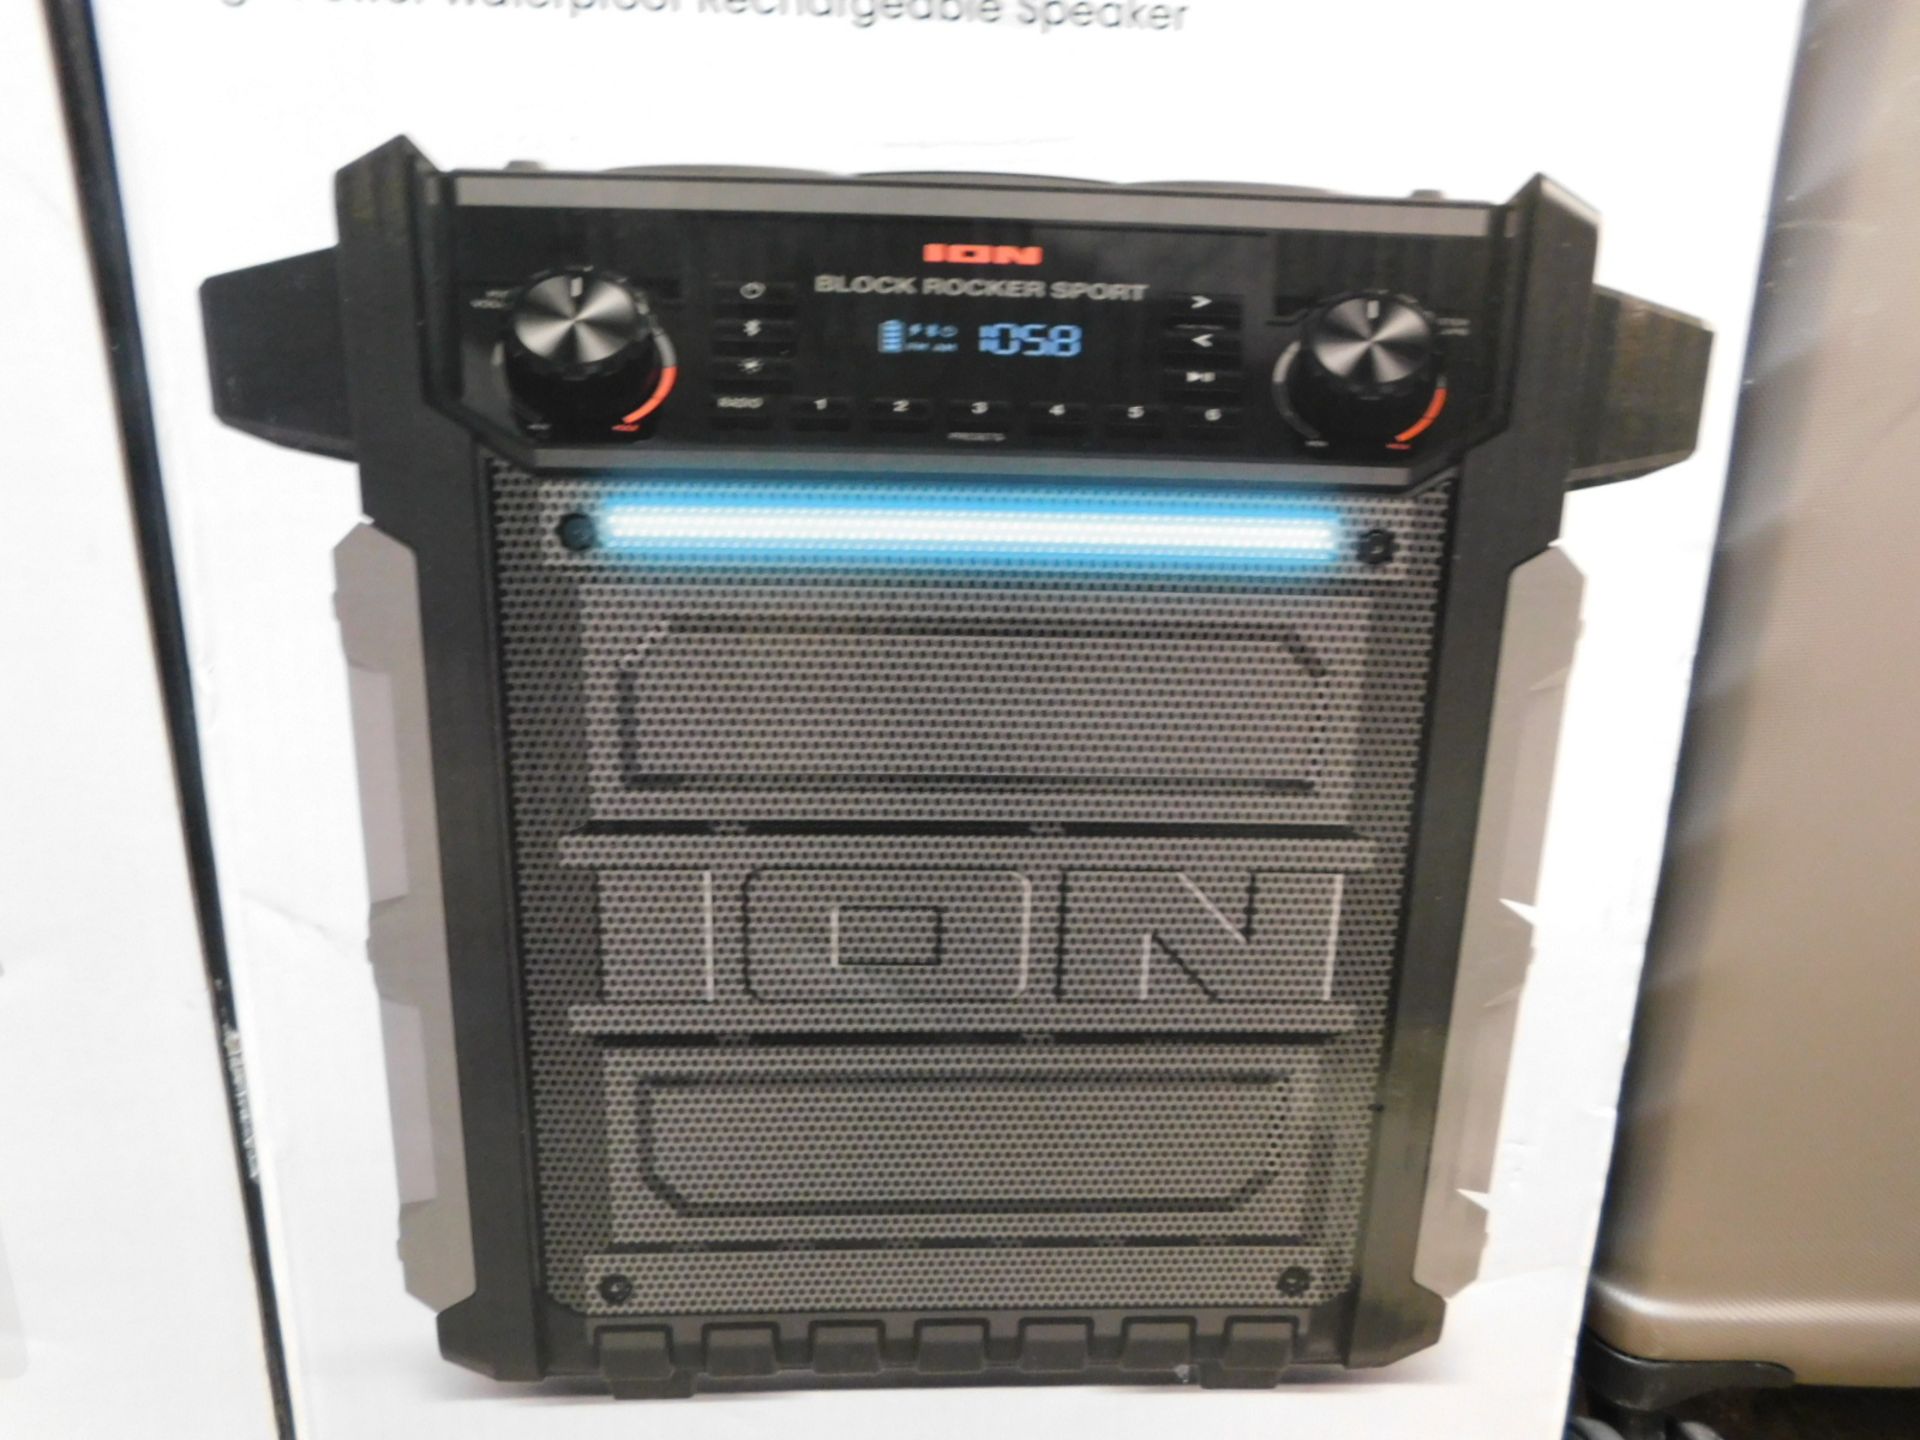 1 BOXED ION BLOCK ROCKER SPORT BLUETOOTH PORTABLE SOUND SYSTEM RRP Â£249.99 (WORKING, IN EXCELLENT